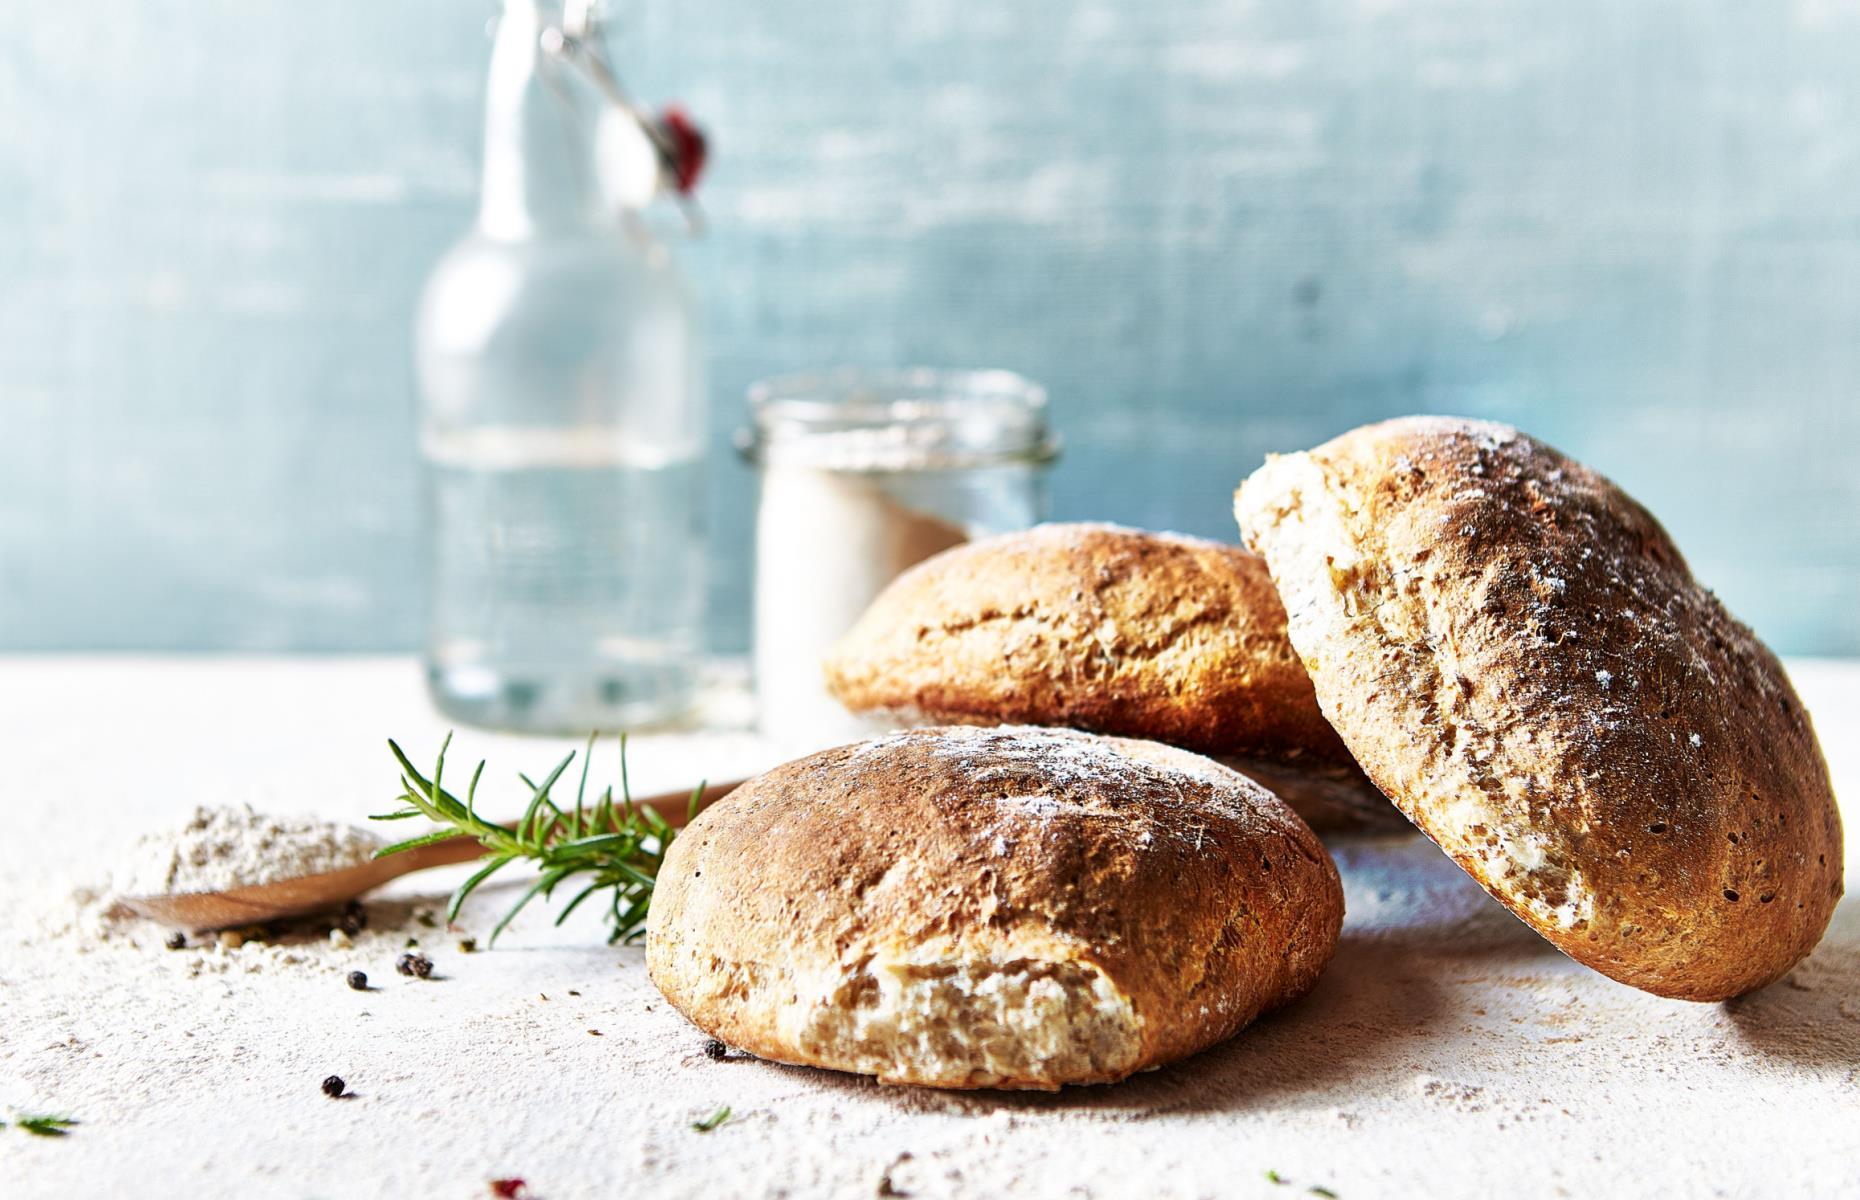 The scent of freshly baked bread is pretty hard to beat. If you're keen to bring that alluring aroma into your own kitchen, our step-by-step guides, tips, and tricks are here to help. Whether you want to try easy soda bread, go Italian with ciabatta and focaccia, whip up a batch of flatbreads, or learn how to make the perfect crusty, crunchy, chewy sourdough loaf (it's easier than you might think), there's a bread recipe for every baker in our collection.  Ready to bake your best loaf yet? Click